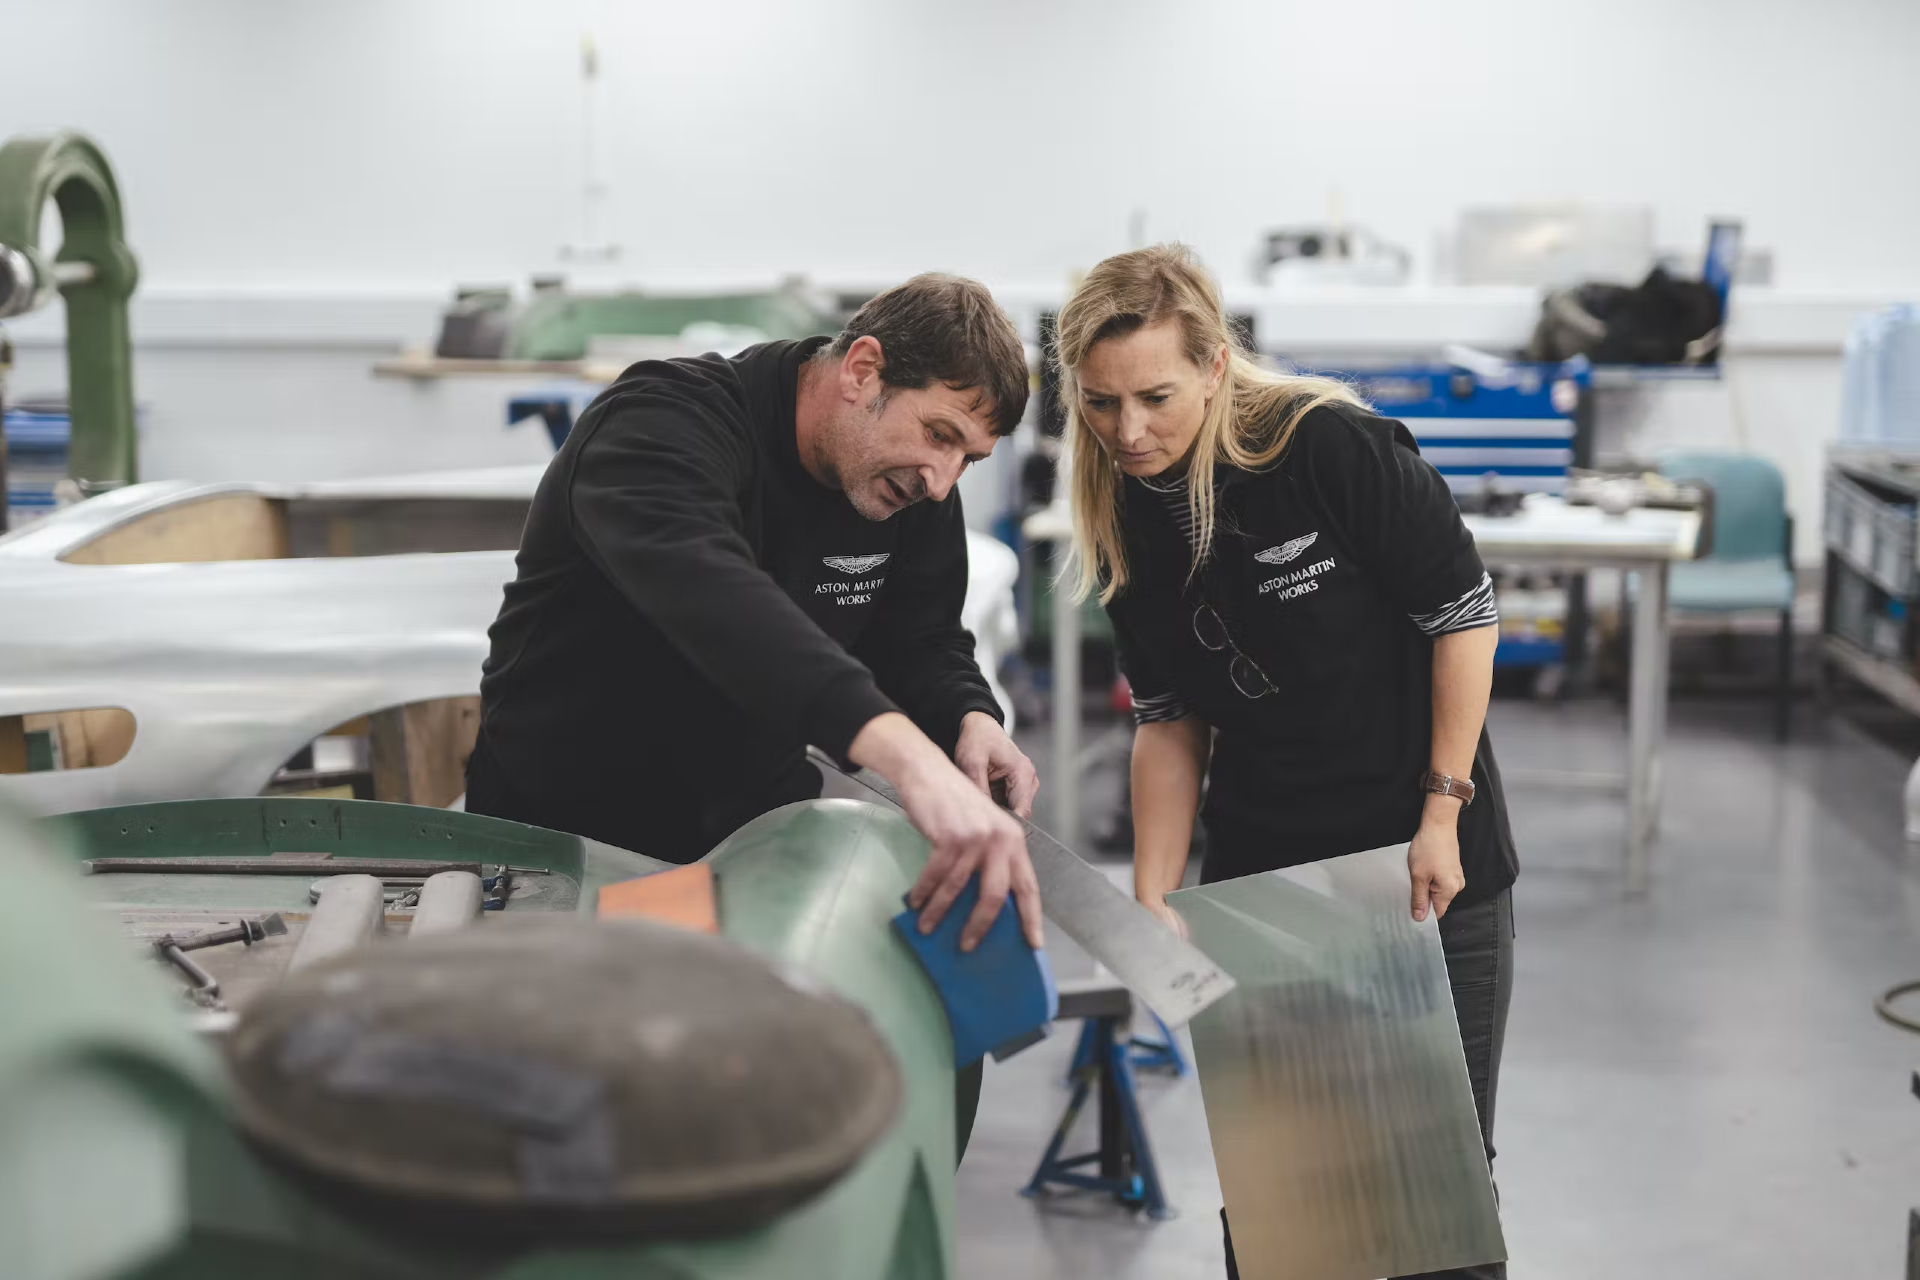 Lending a hand at Aston Martin Works